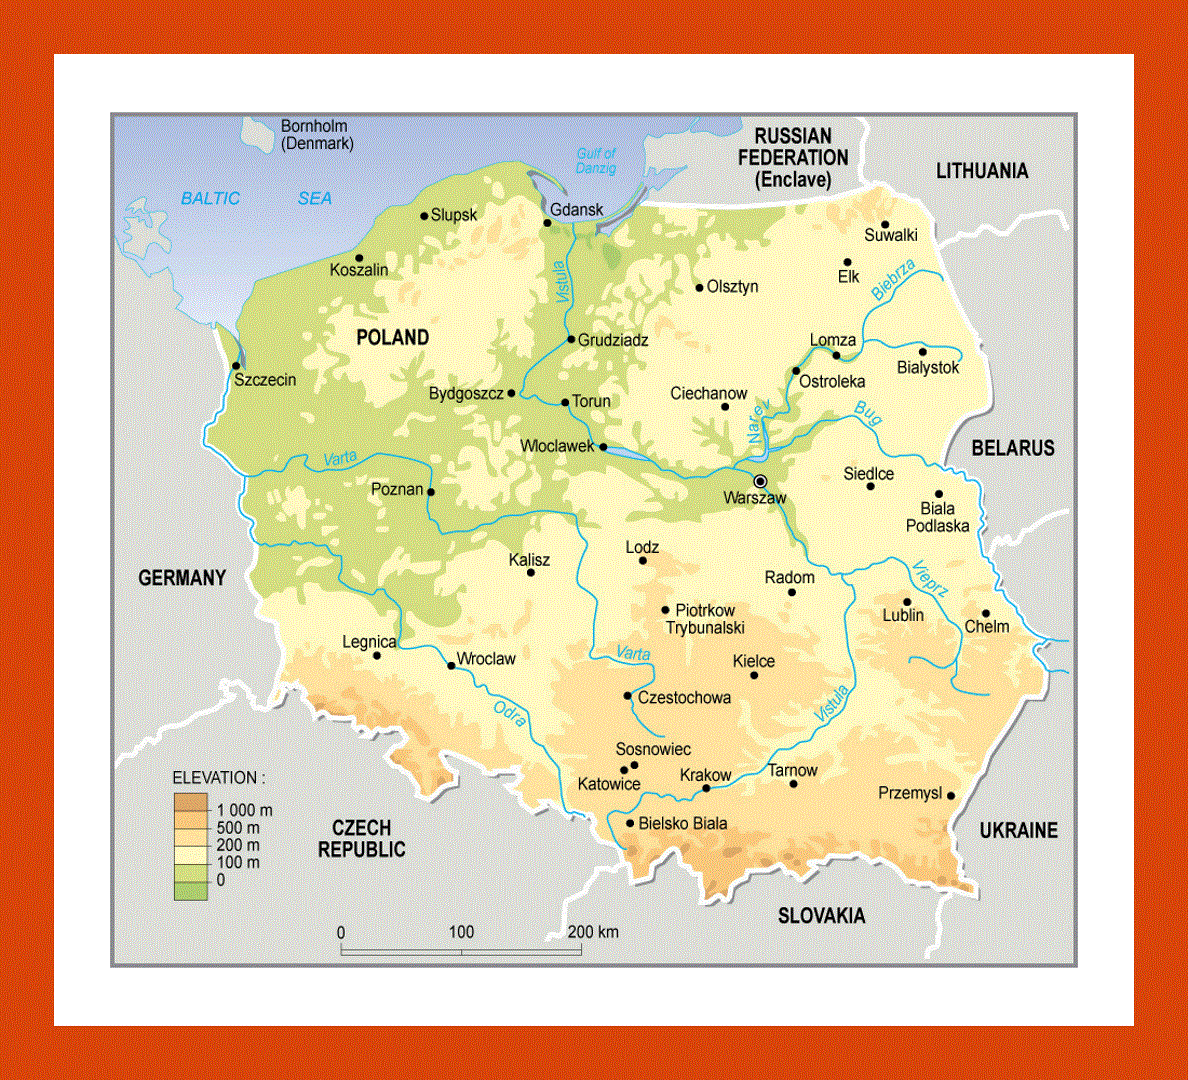 Elevation map of Poland